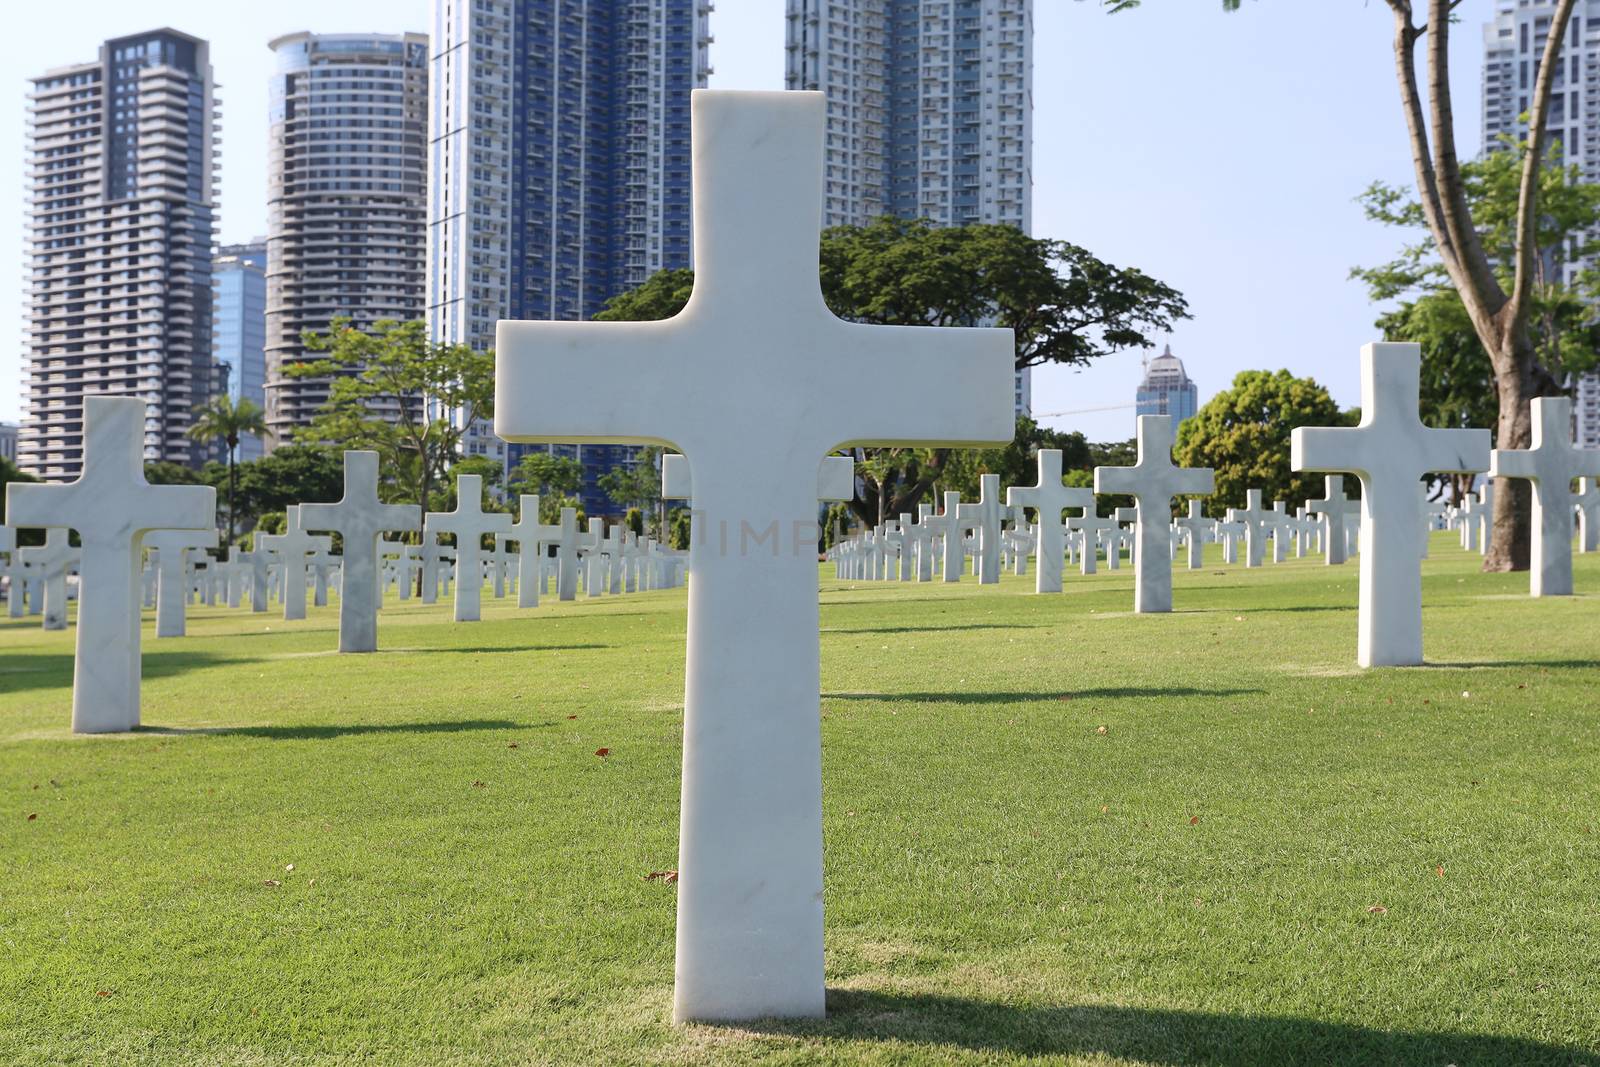 American Memorial Cemetery in Manila, Philippines.It has the largest number of graves of any cemetery for U.S. personnel killed during World War II and holds war dead from the Philippines and other allied nations